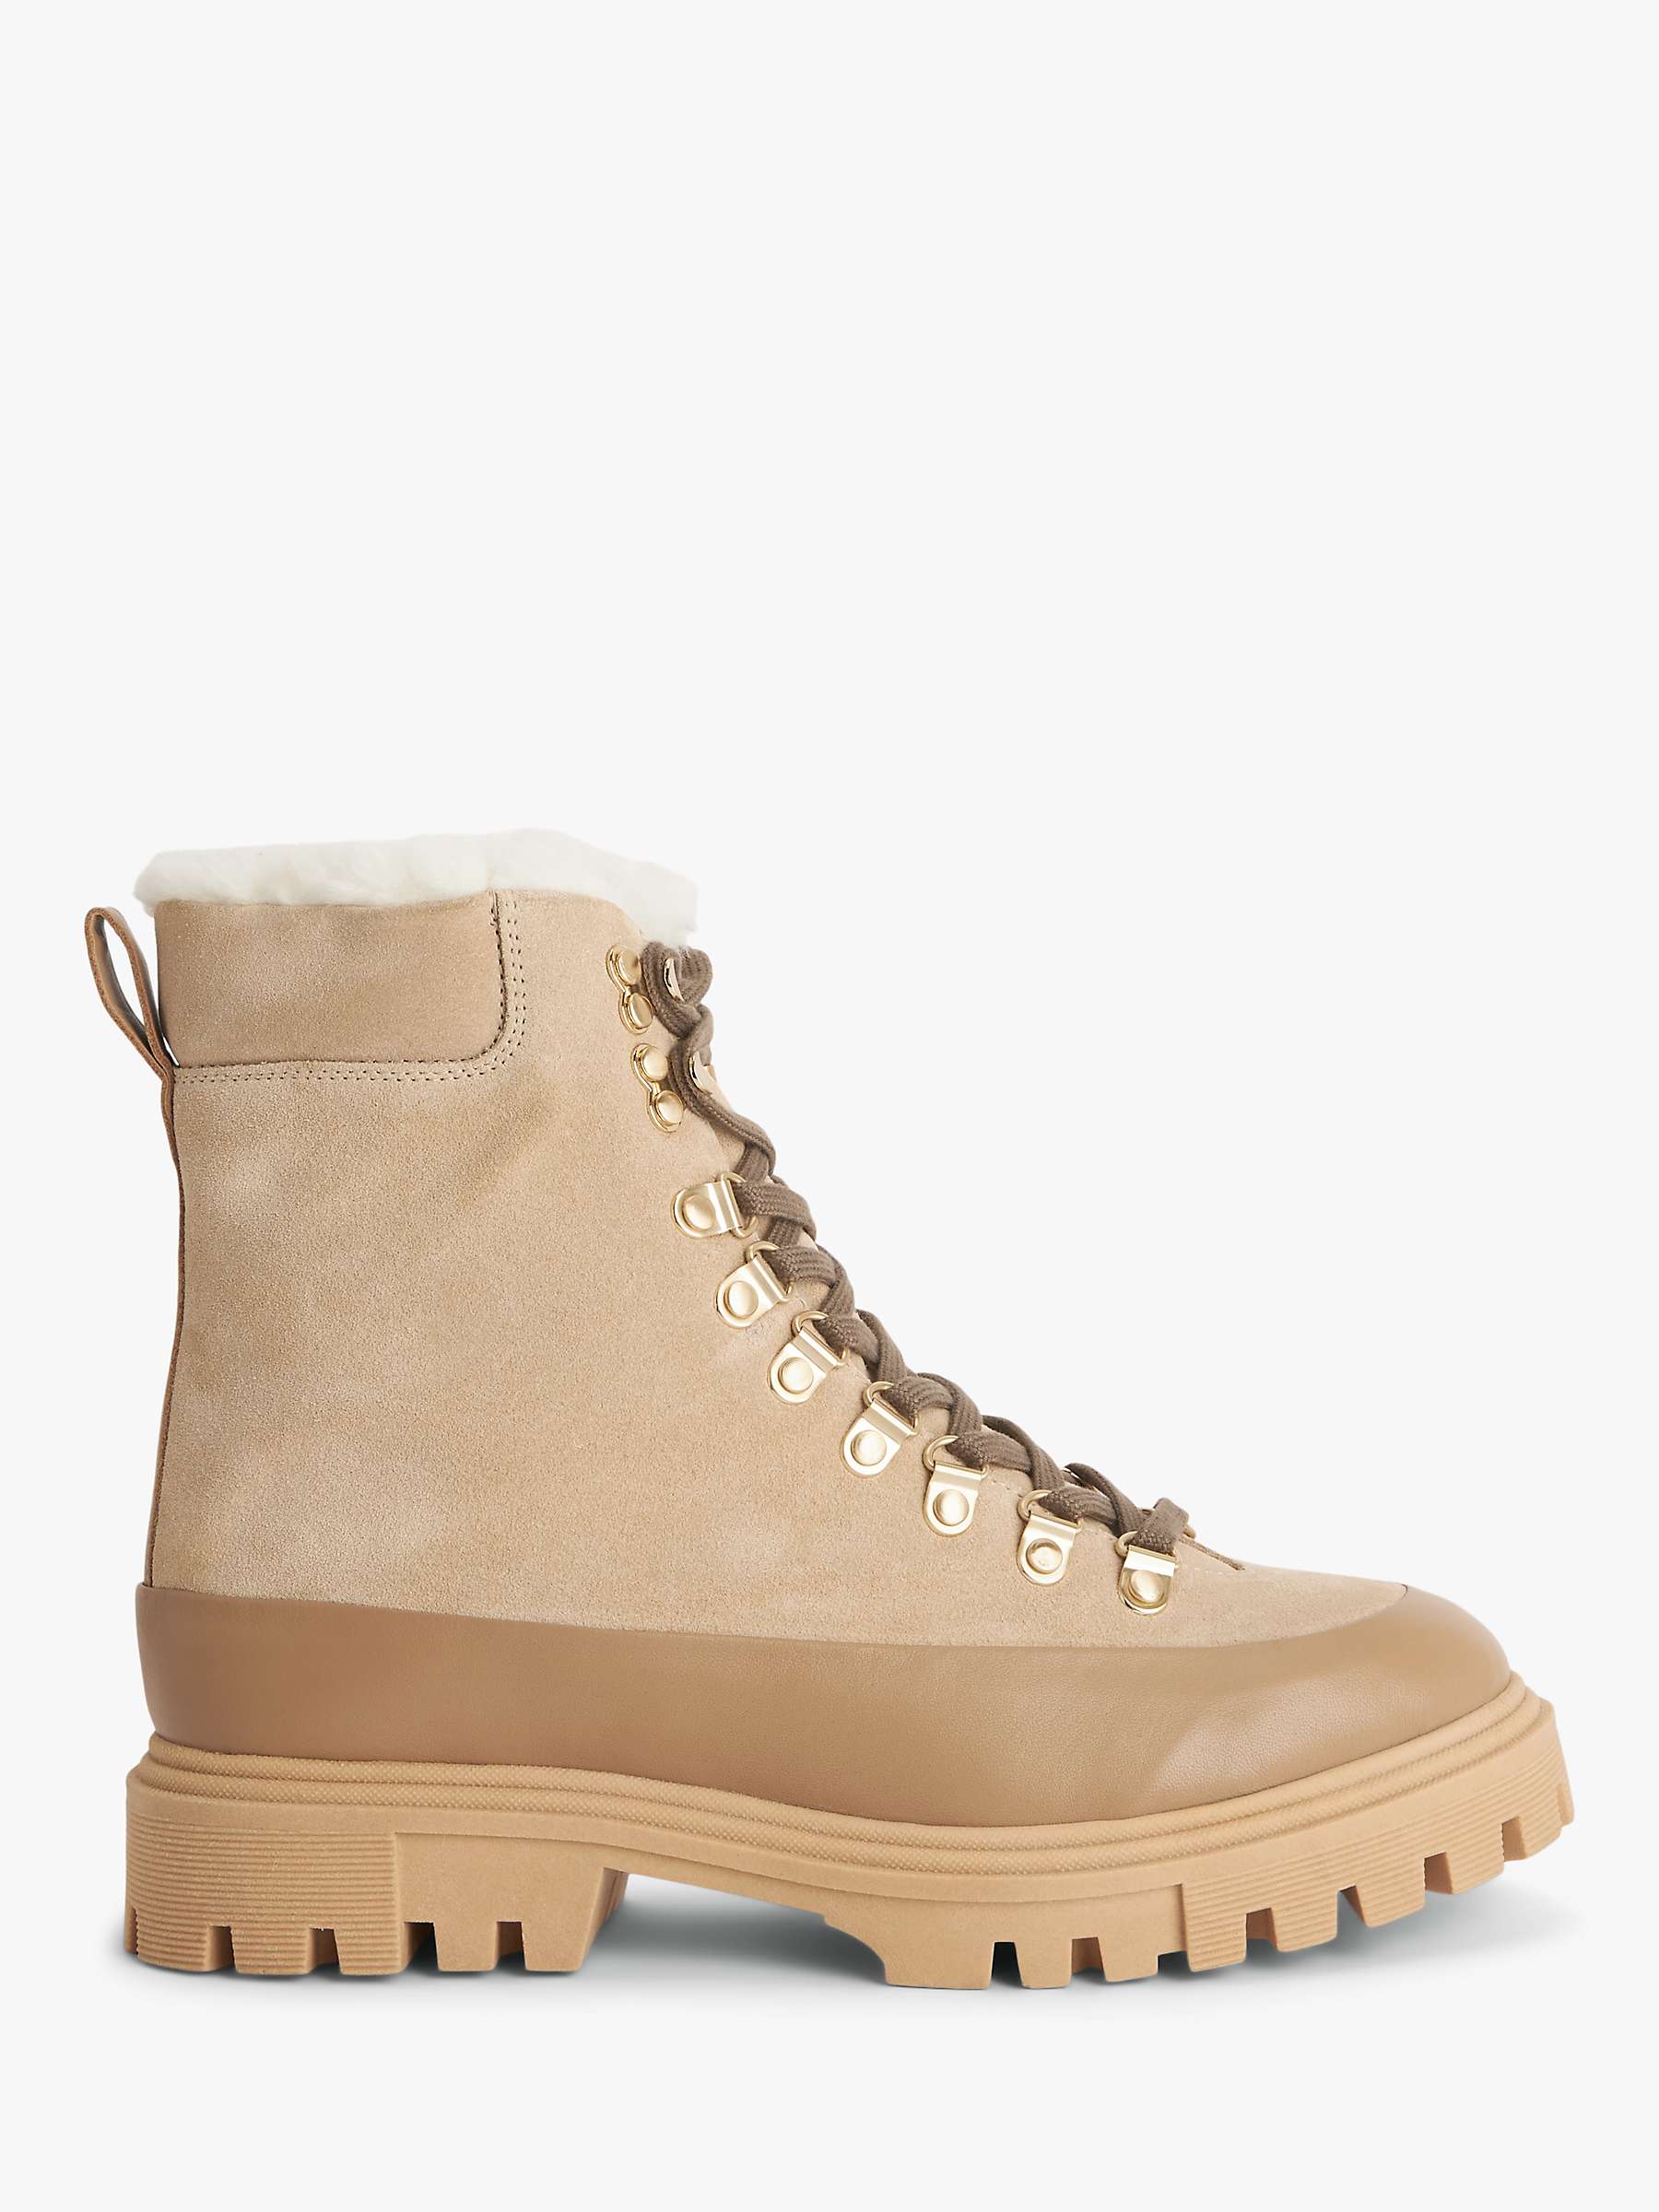 Buy John Lewis Paddock Leather/Suede Lugsole Combat Boots Online at johnlewis.com